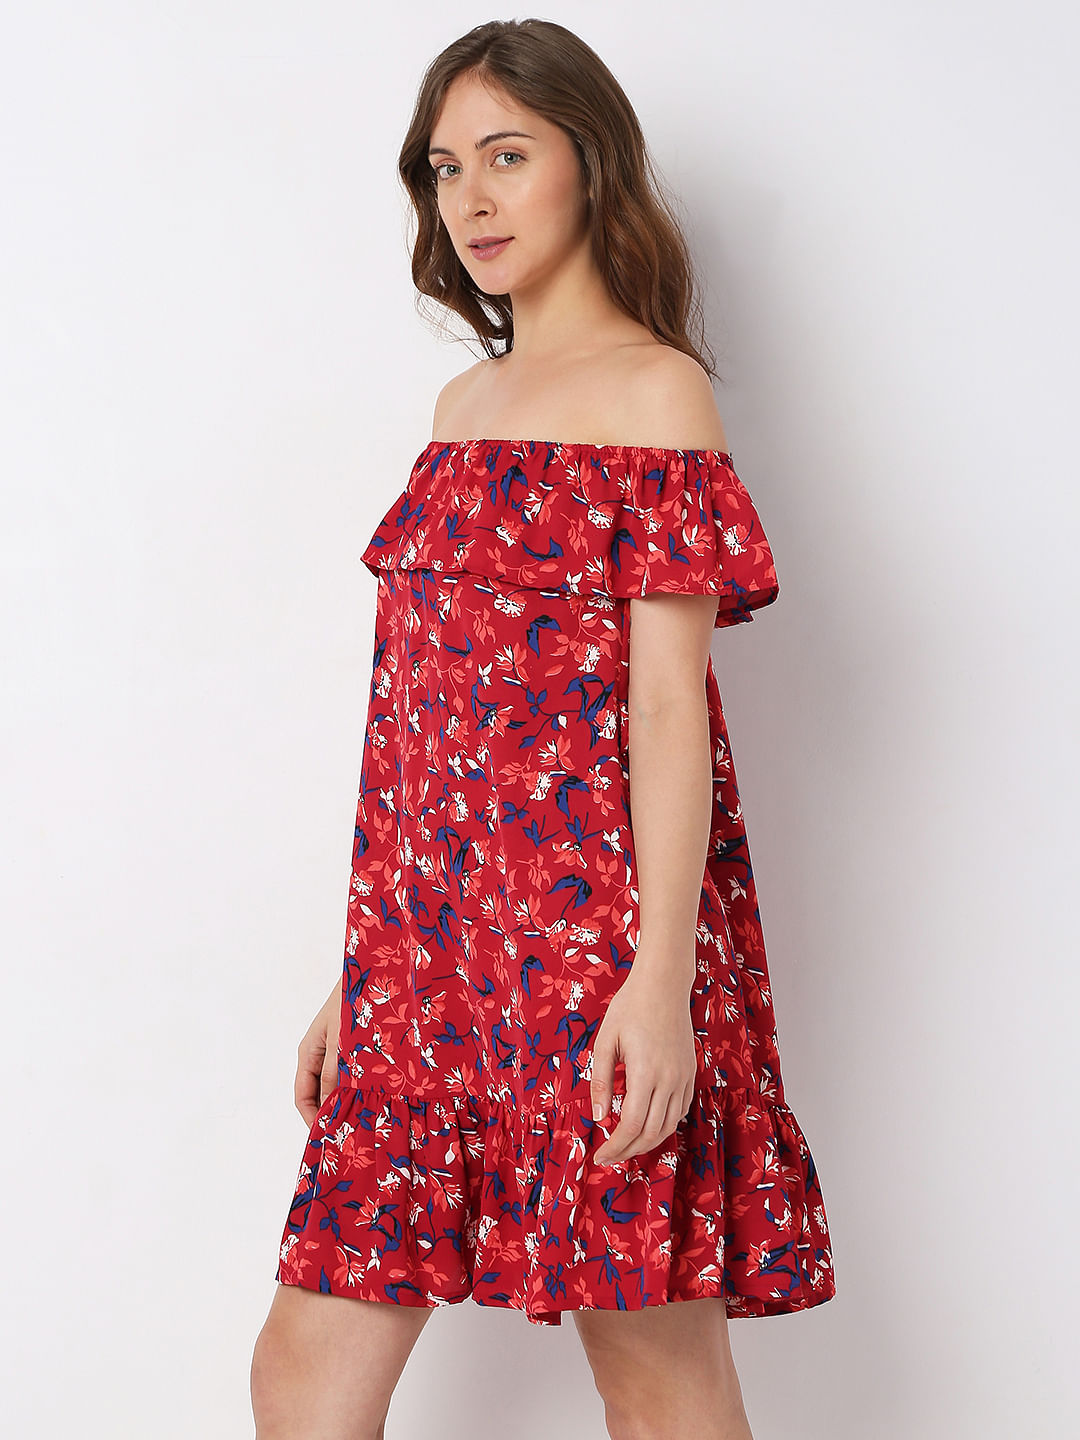 Chiffon Casual Summer Dress Women 2023 Red Maxi Clothes Elegant Tunics  Floral Beach Long Bodycon Party Prom Evening Dresses For